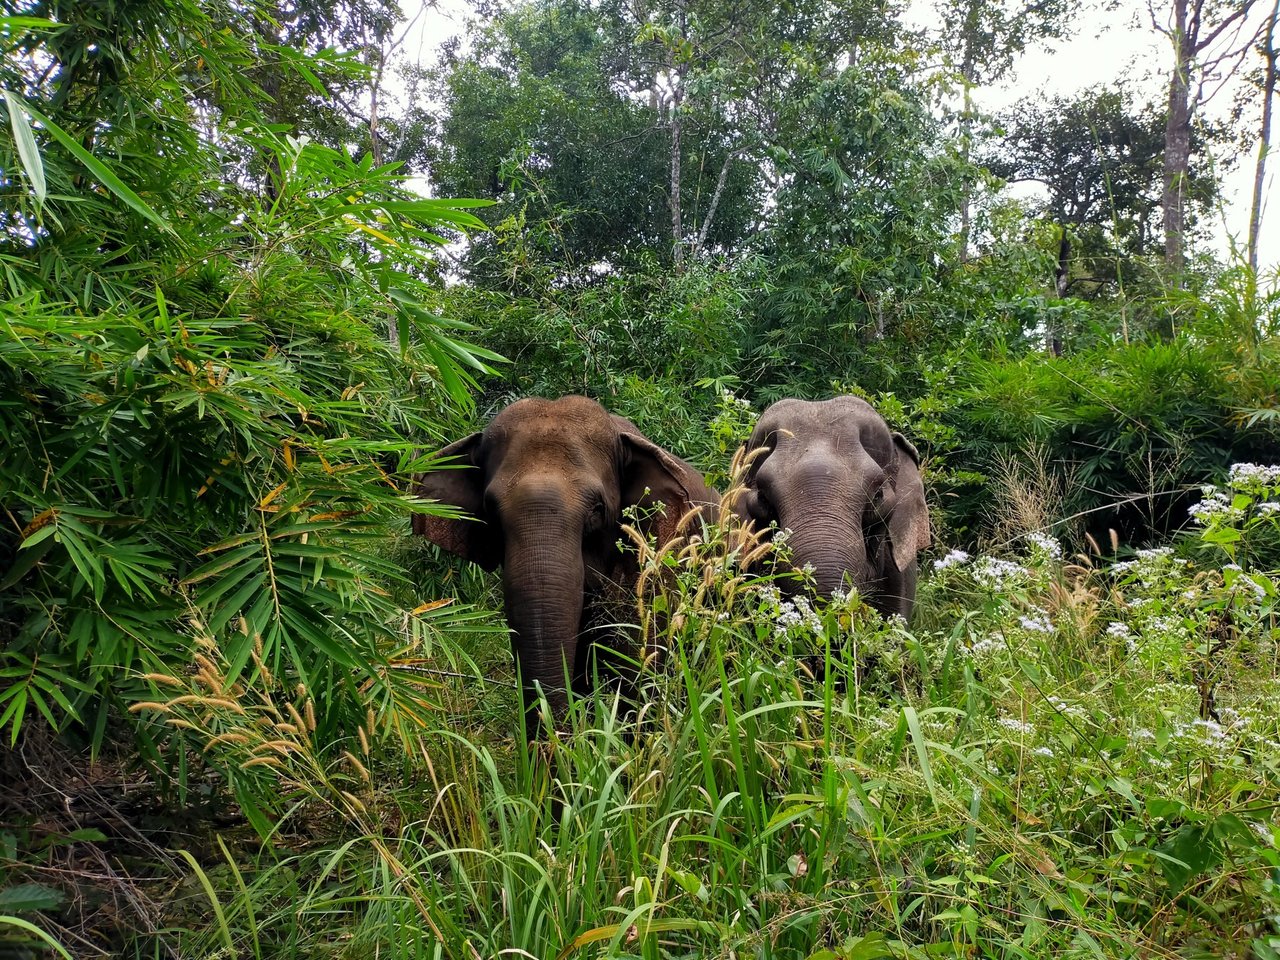 Elephants Gee Chreng and Ning Wan at Elephant Valley Project. 